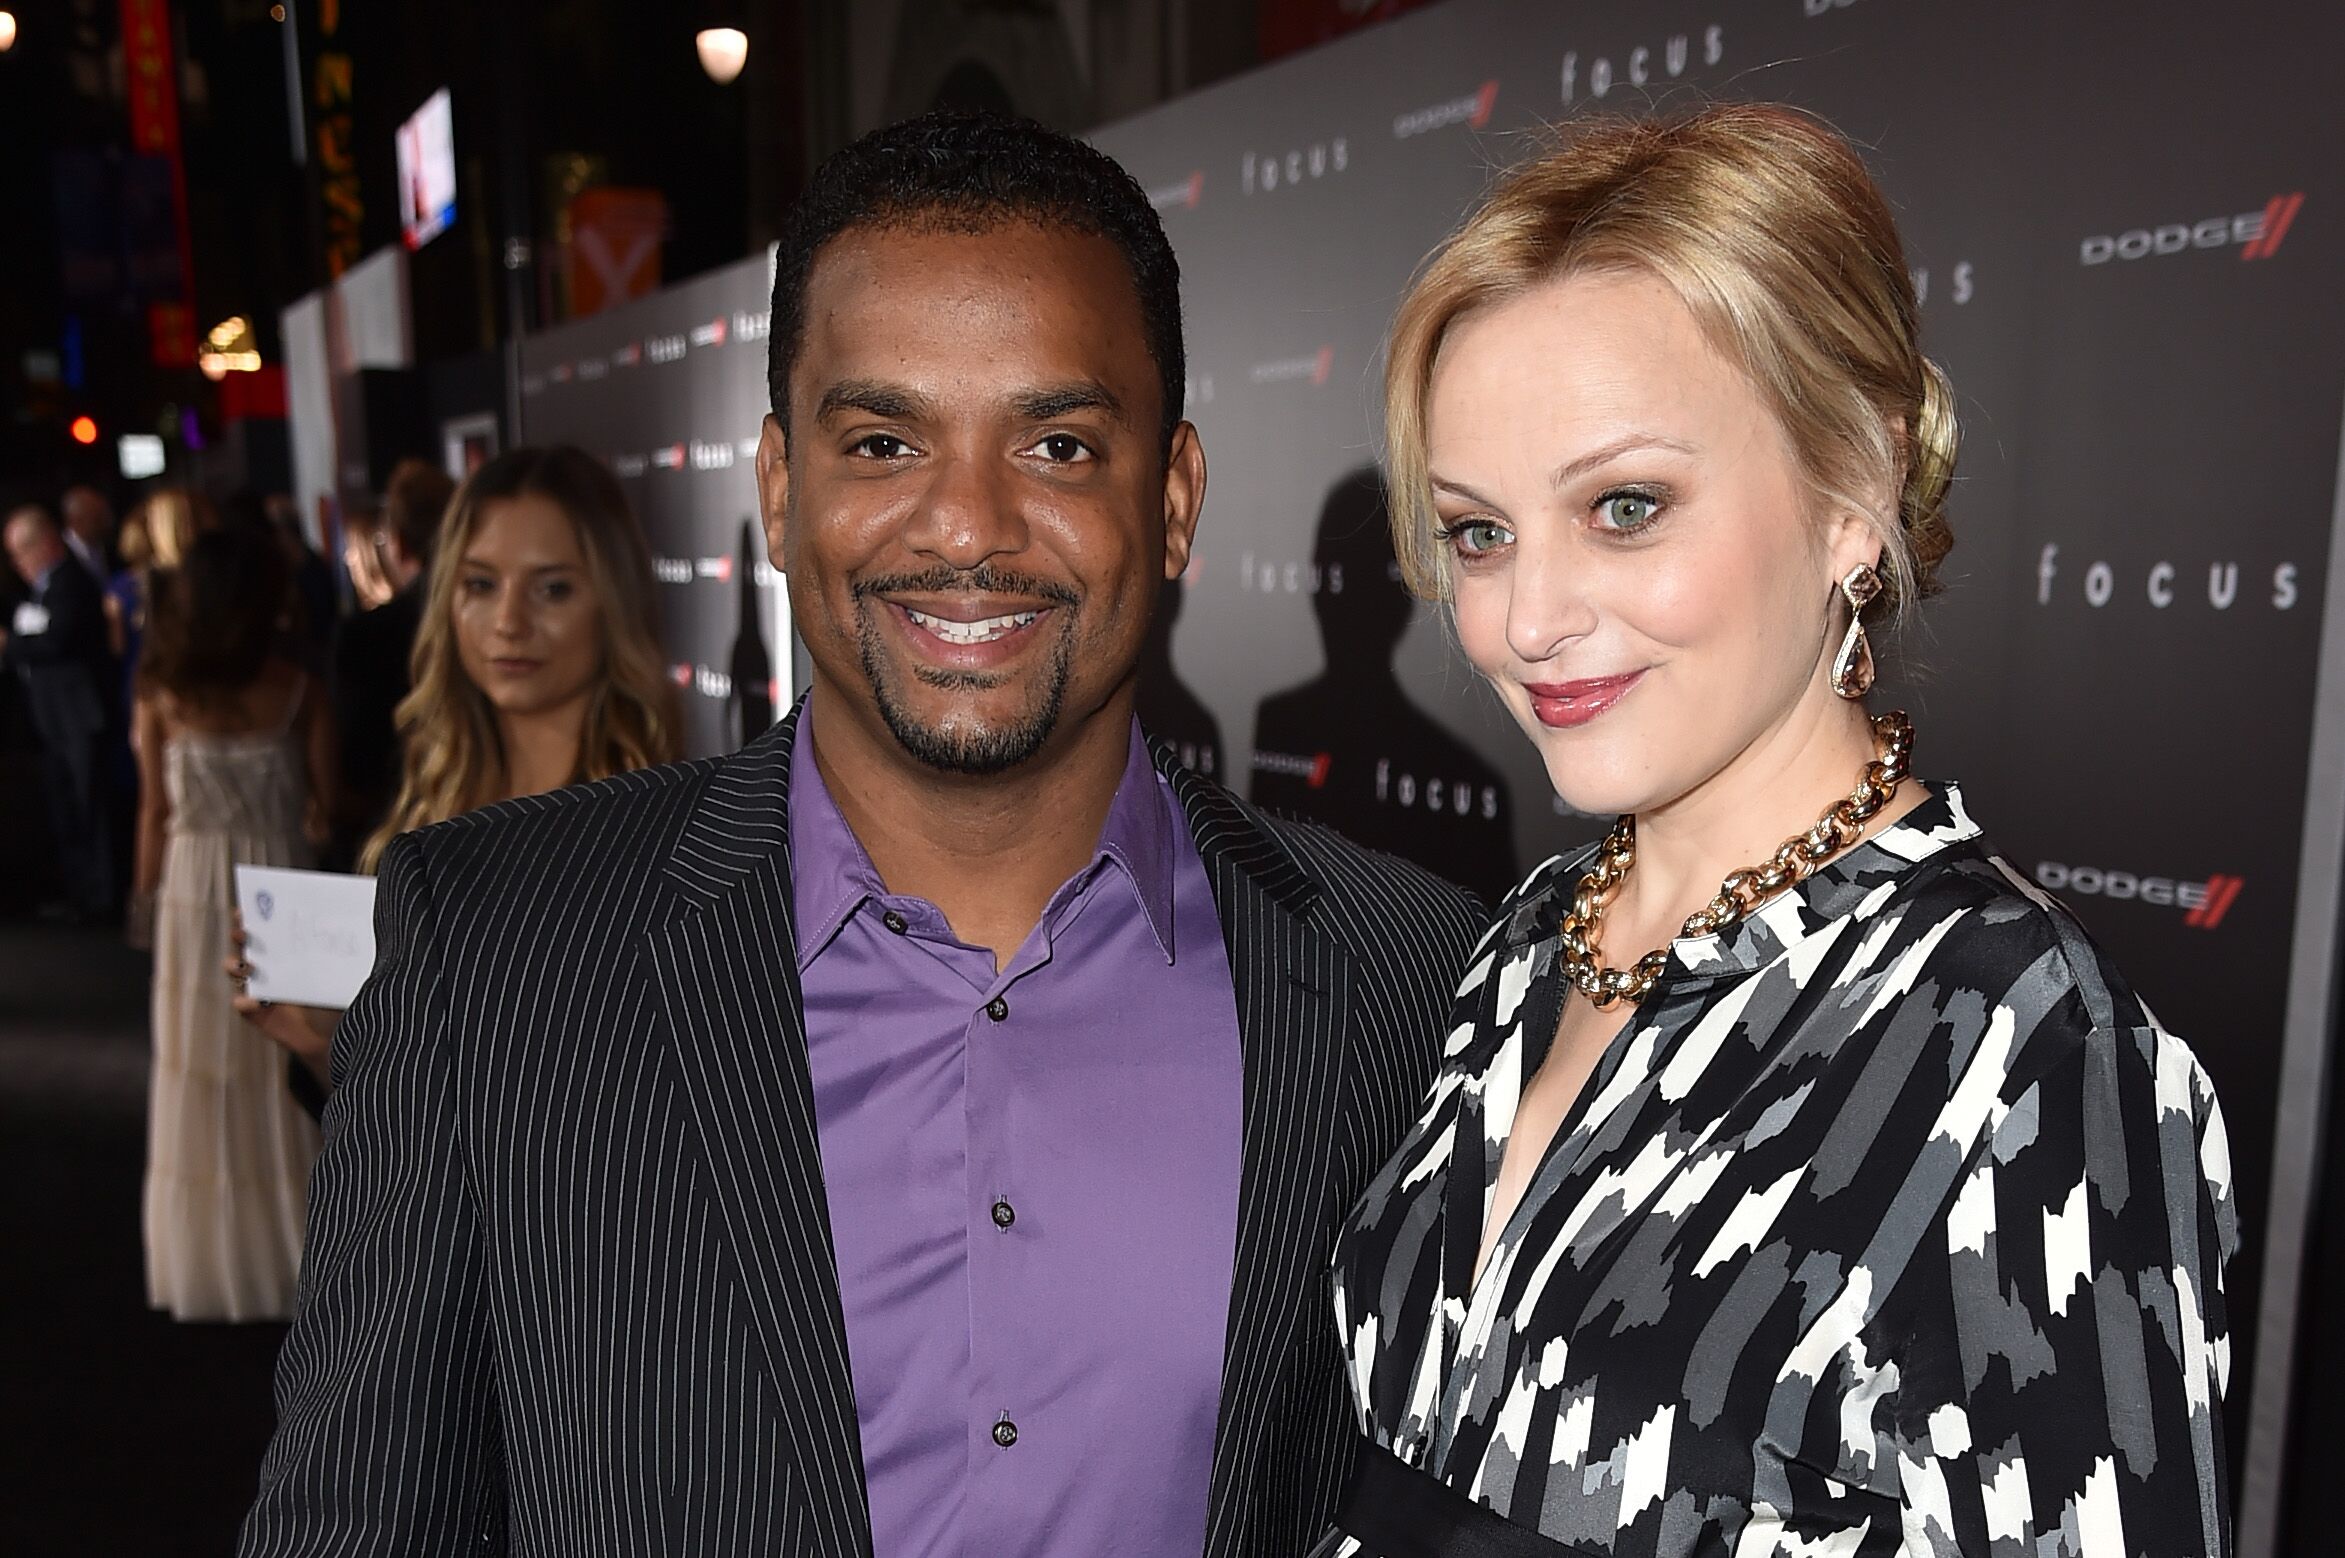 Alfonso Ribeiro and wife Angela Unkrich at the premiere of "Focus" at TCL Chinese Theatre in Los Angeles in 2015 | Photo: Getty Images